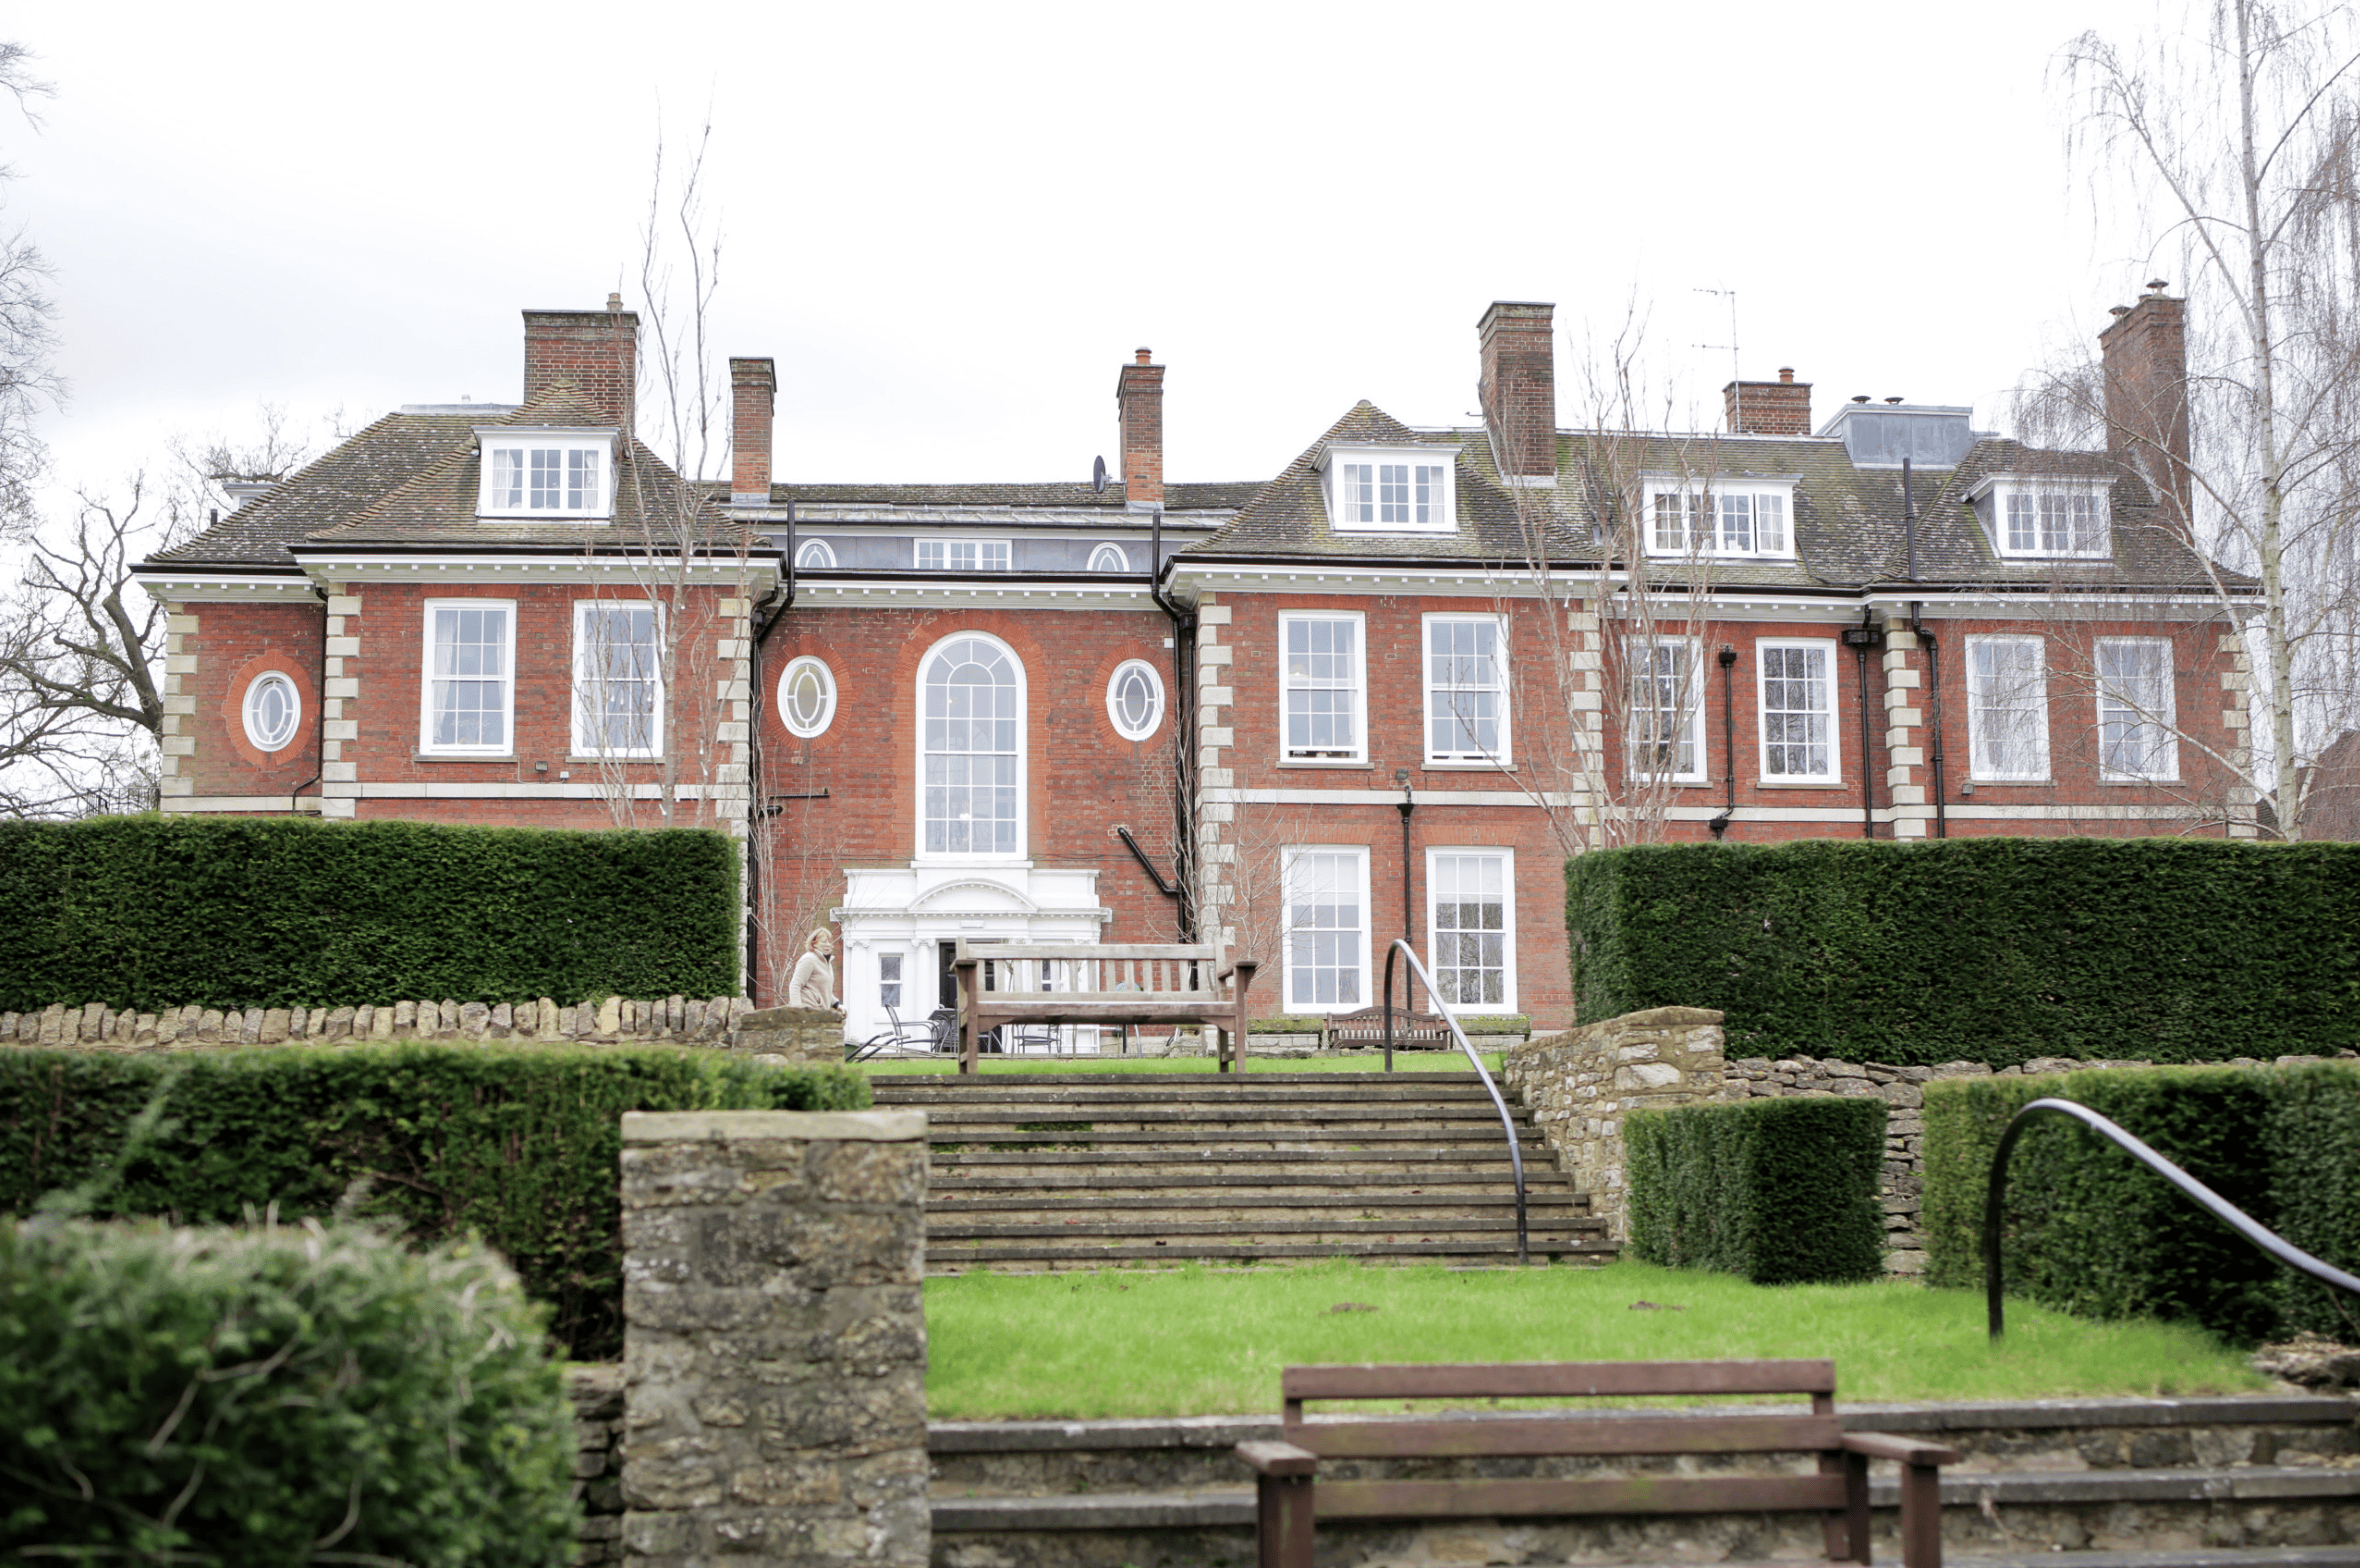 Exterior of Sharnbrook House in Bedford, Bedfordshire